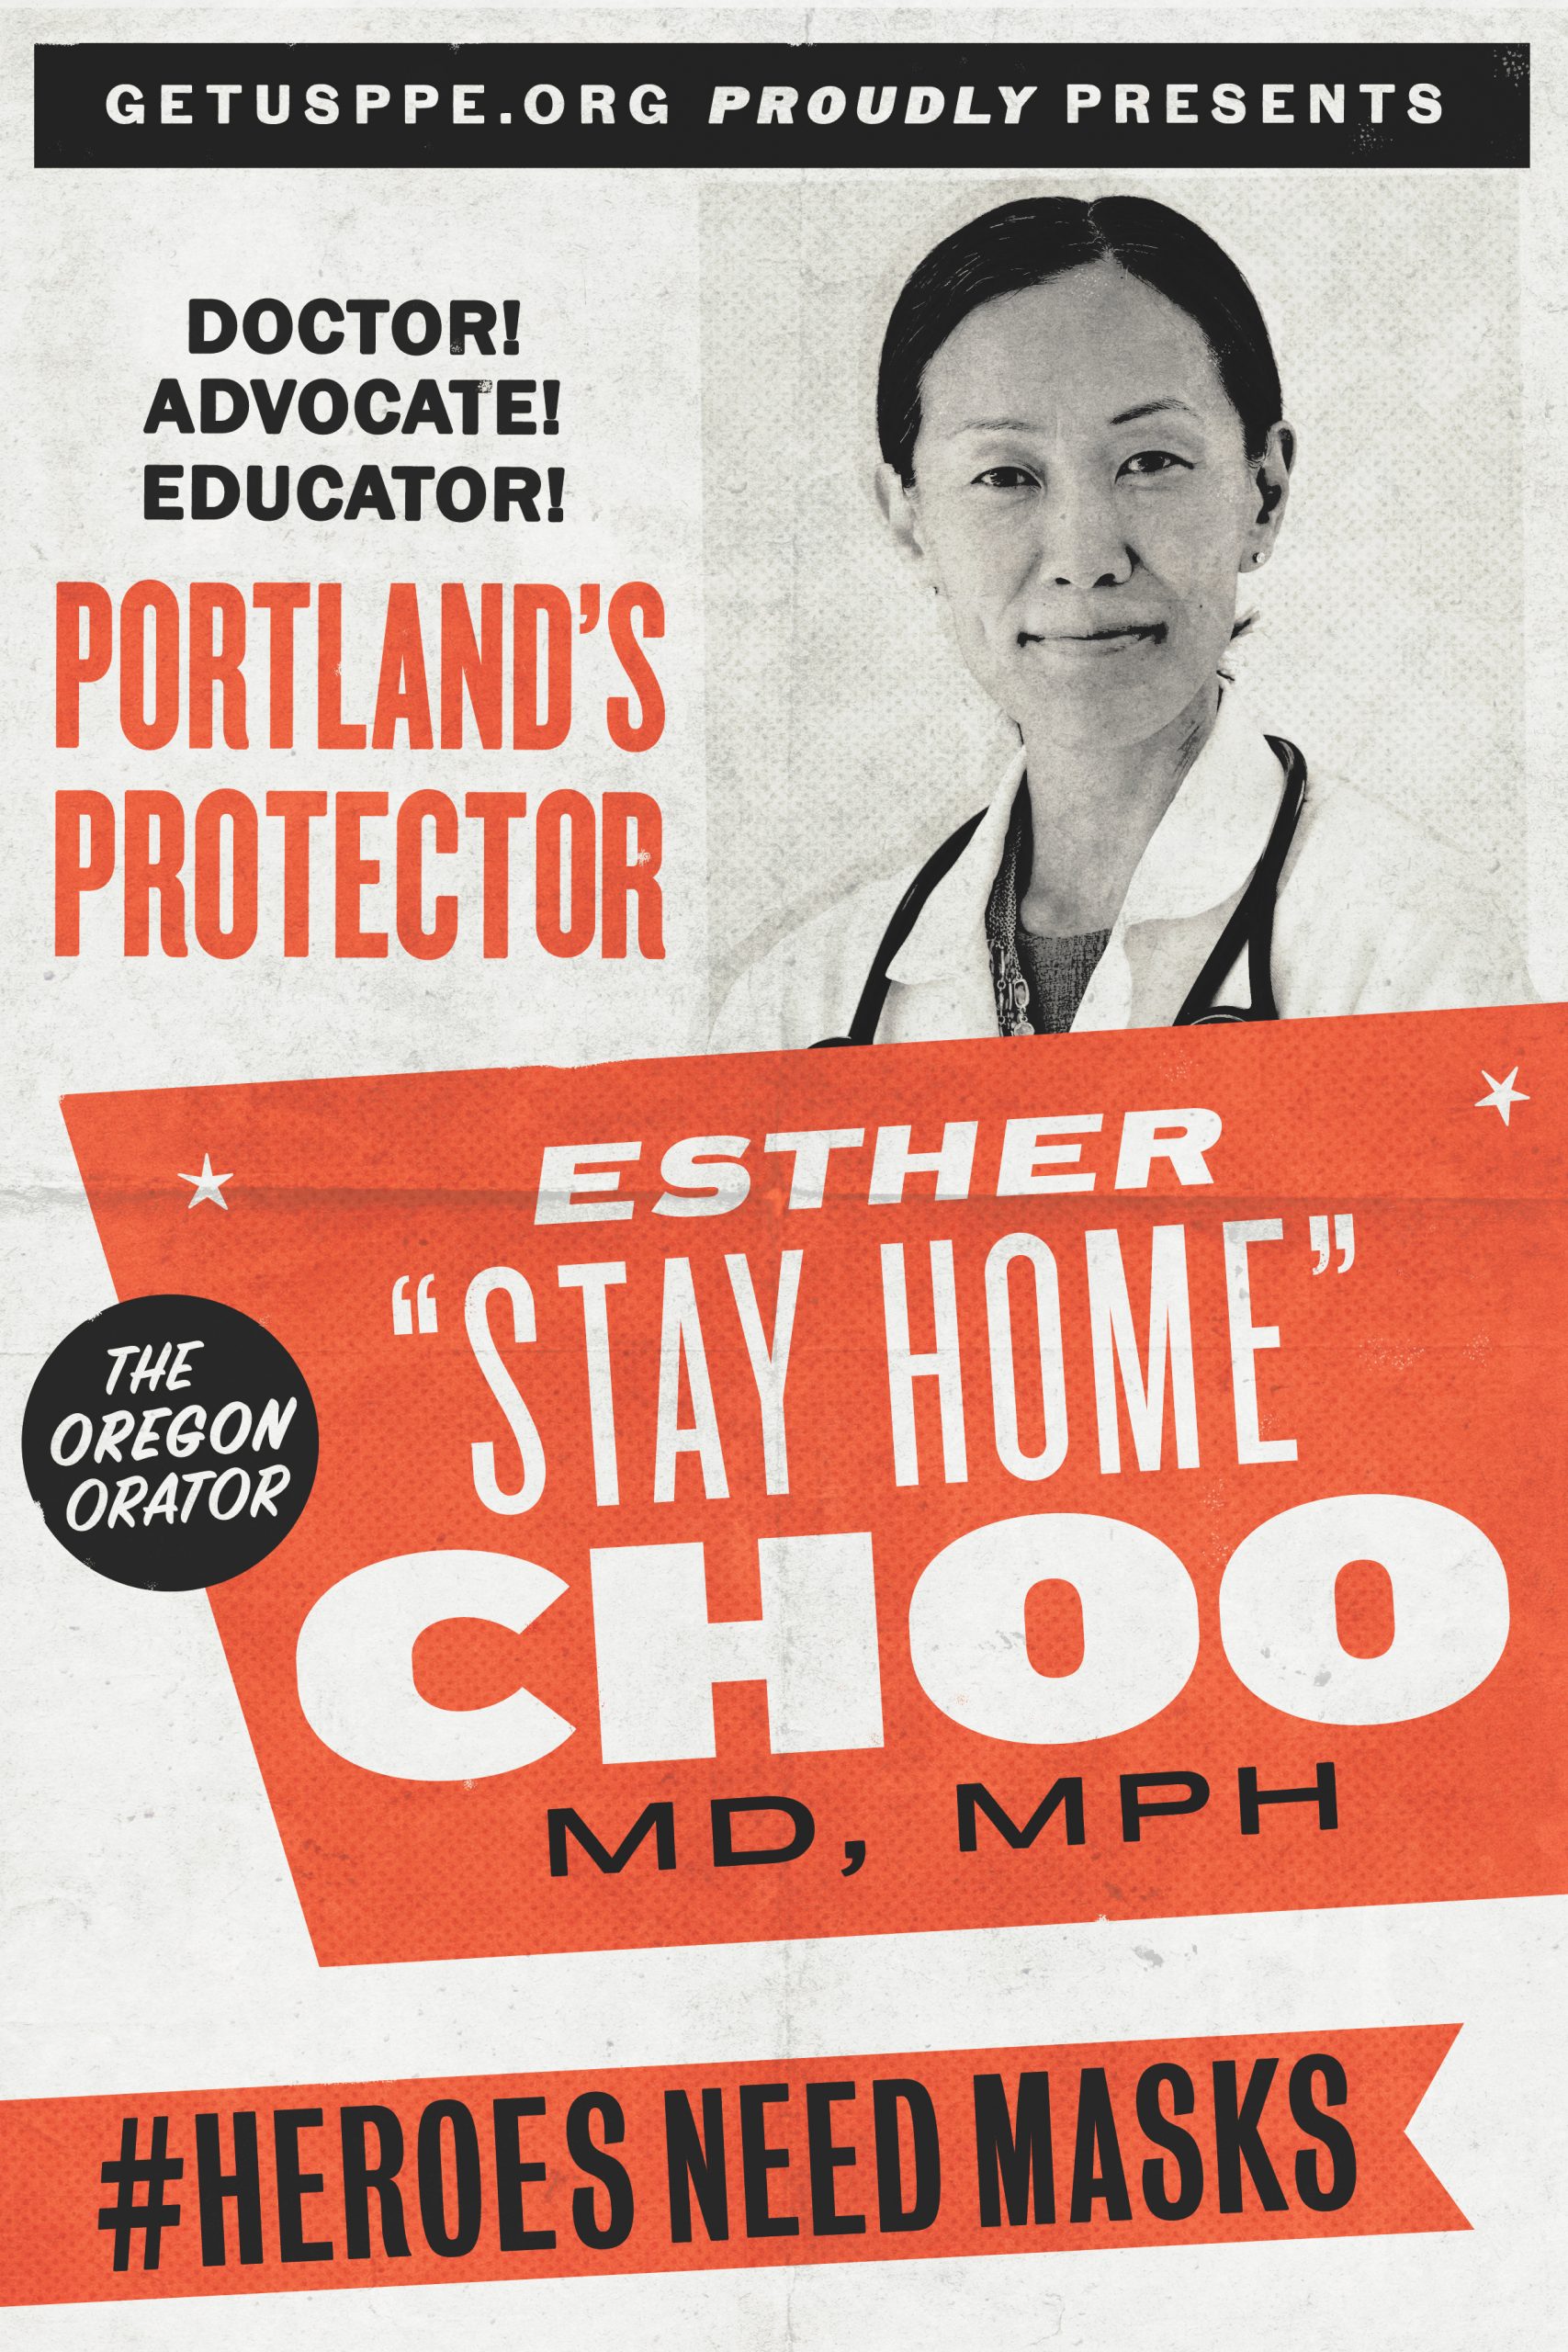 Dr. Esther Choo, MD MPH